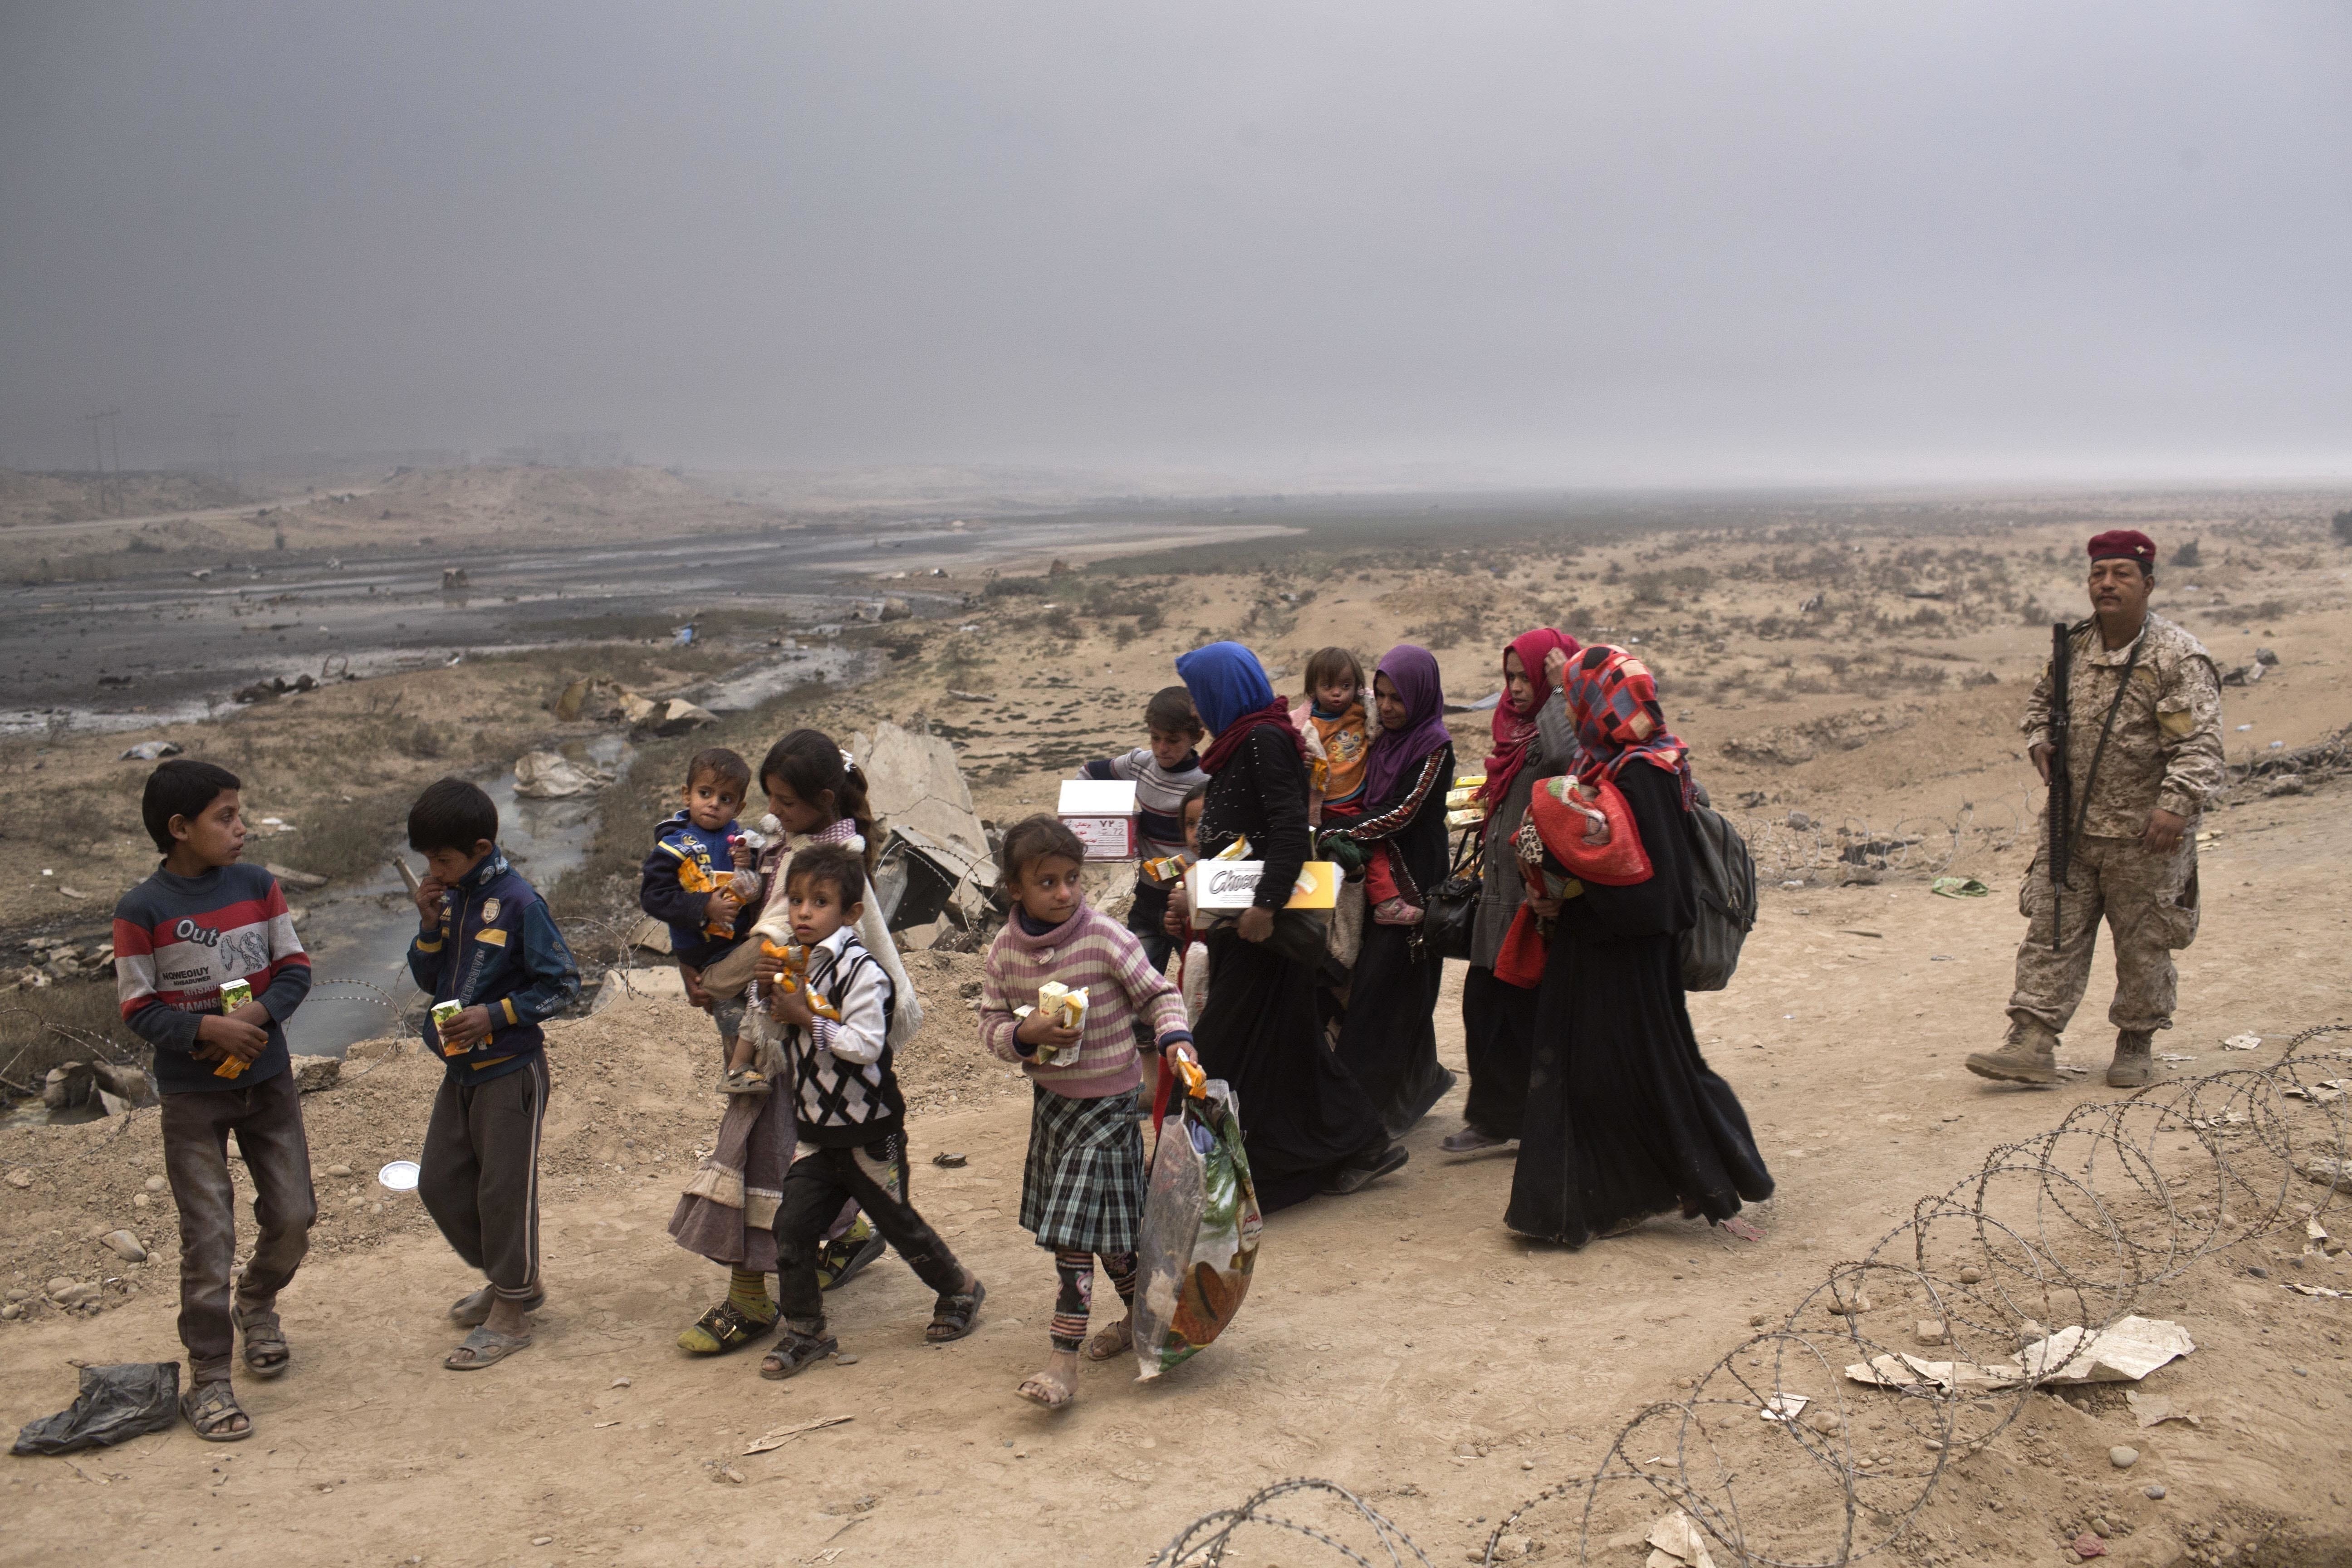 Internally displaced persons clear a checkpoint in Qayara, some 50 kilometers south of Mosul, Iraq, Wednesday, Oct. 26, 2016. Islamic State militants have been going door to door in farming communities south of Mosul, ordering people at gunpoint to follow them north into the city and apparently using them as human shields as they retreat from Iraqi forces. Witnesses to the forced evacuation describe scenes of chaos as hundreds of people were driven north across the Ninevah plains and into the heavily-fortified city, where the extremists are believed to be preparing for a climactic showdown.